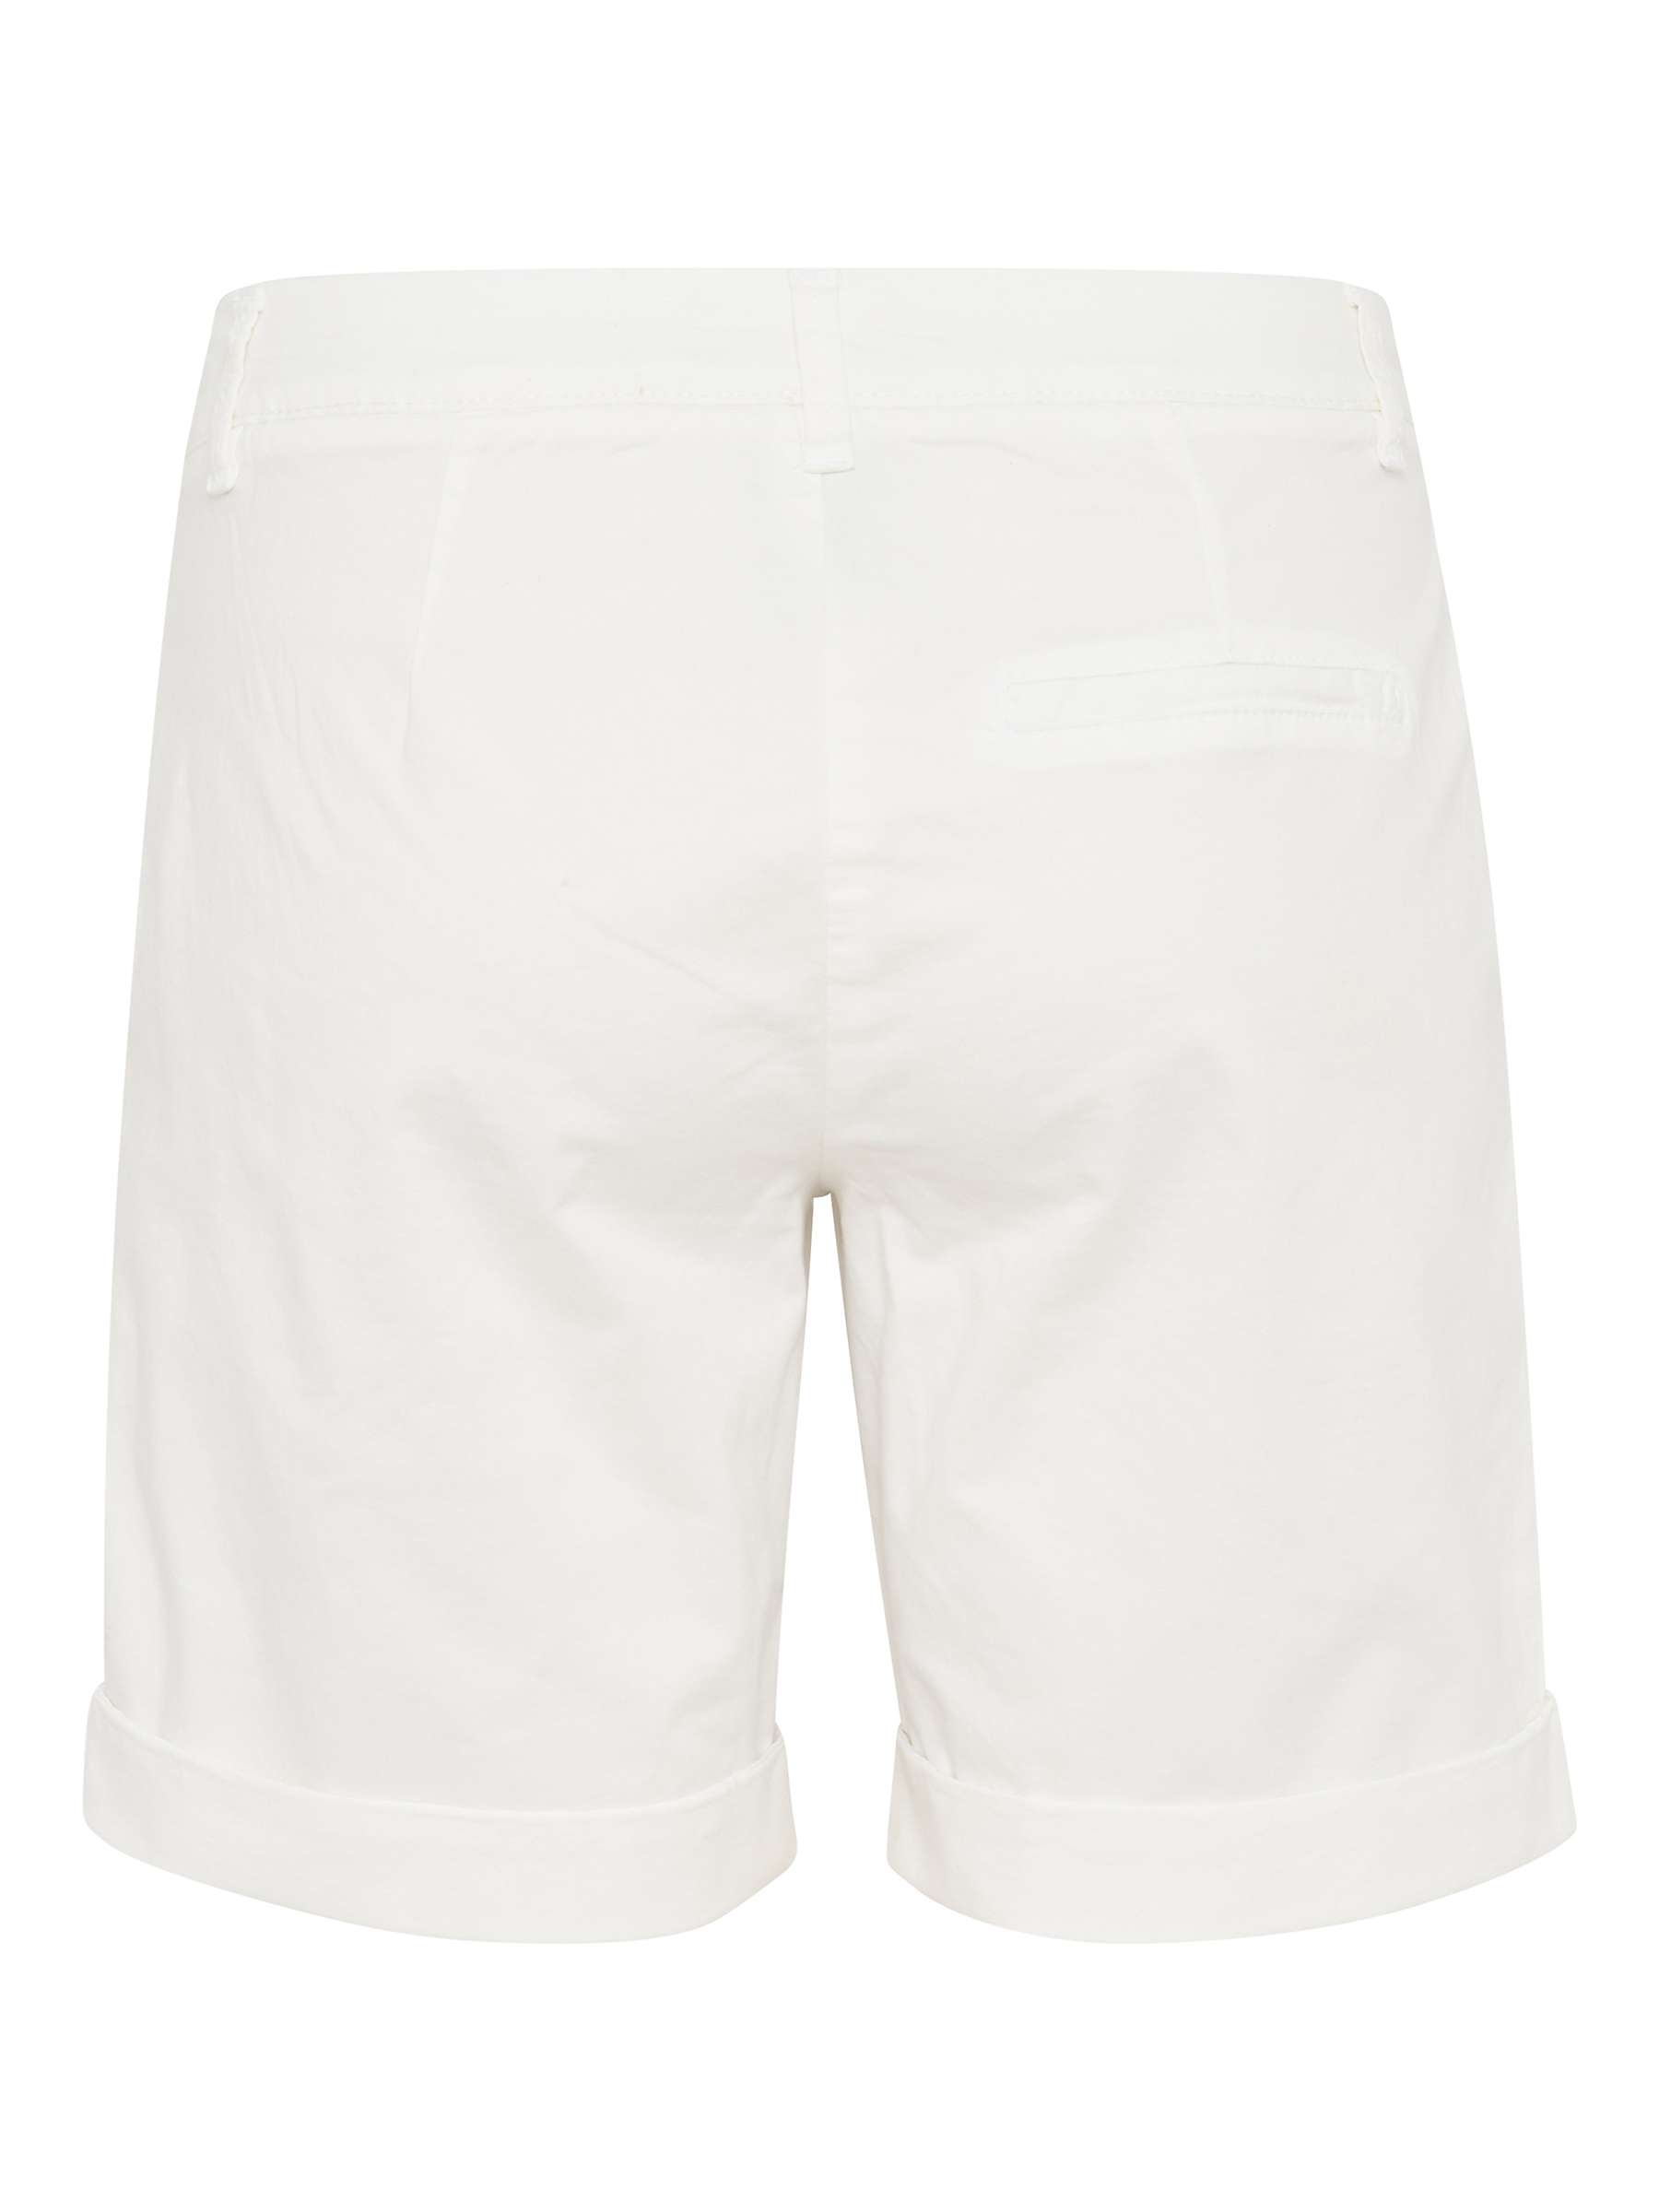 Buy Part Two Hanijan Regular Fit Folded Cuff Shorts, Bright White Online at johnlewis.com